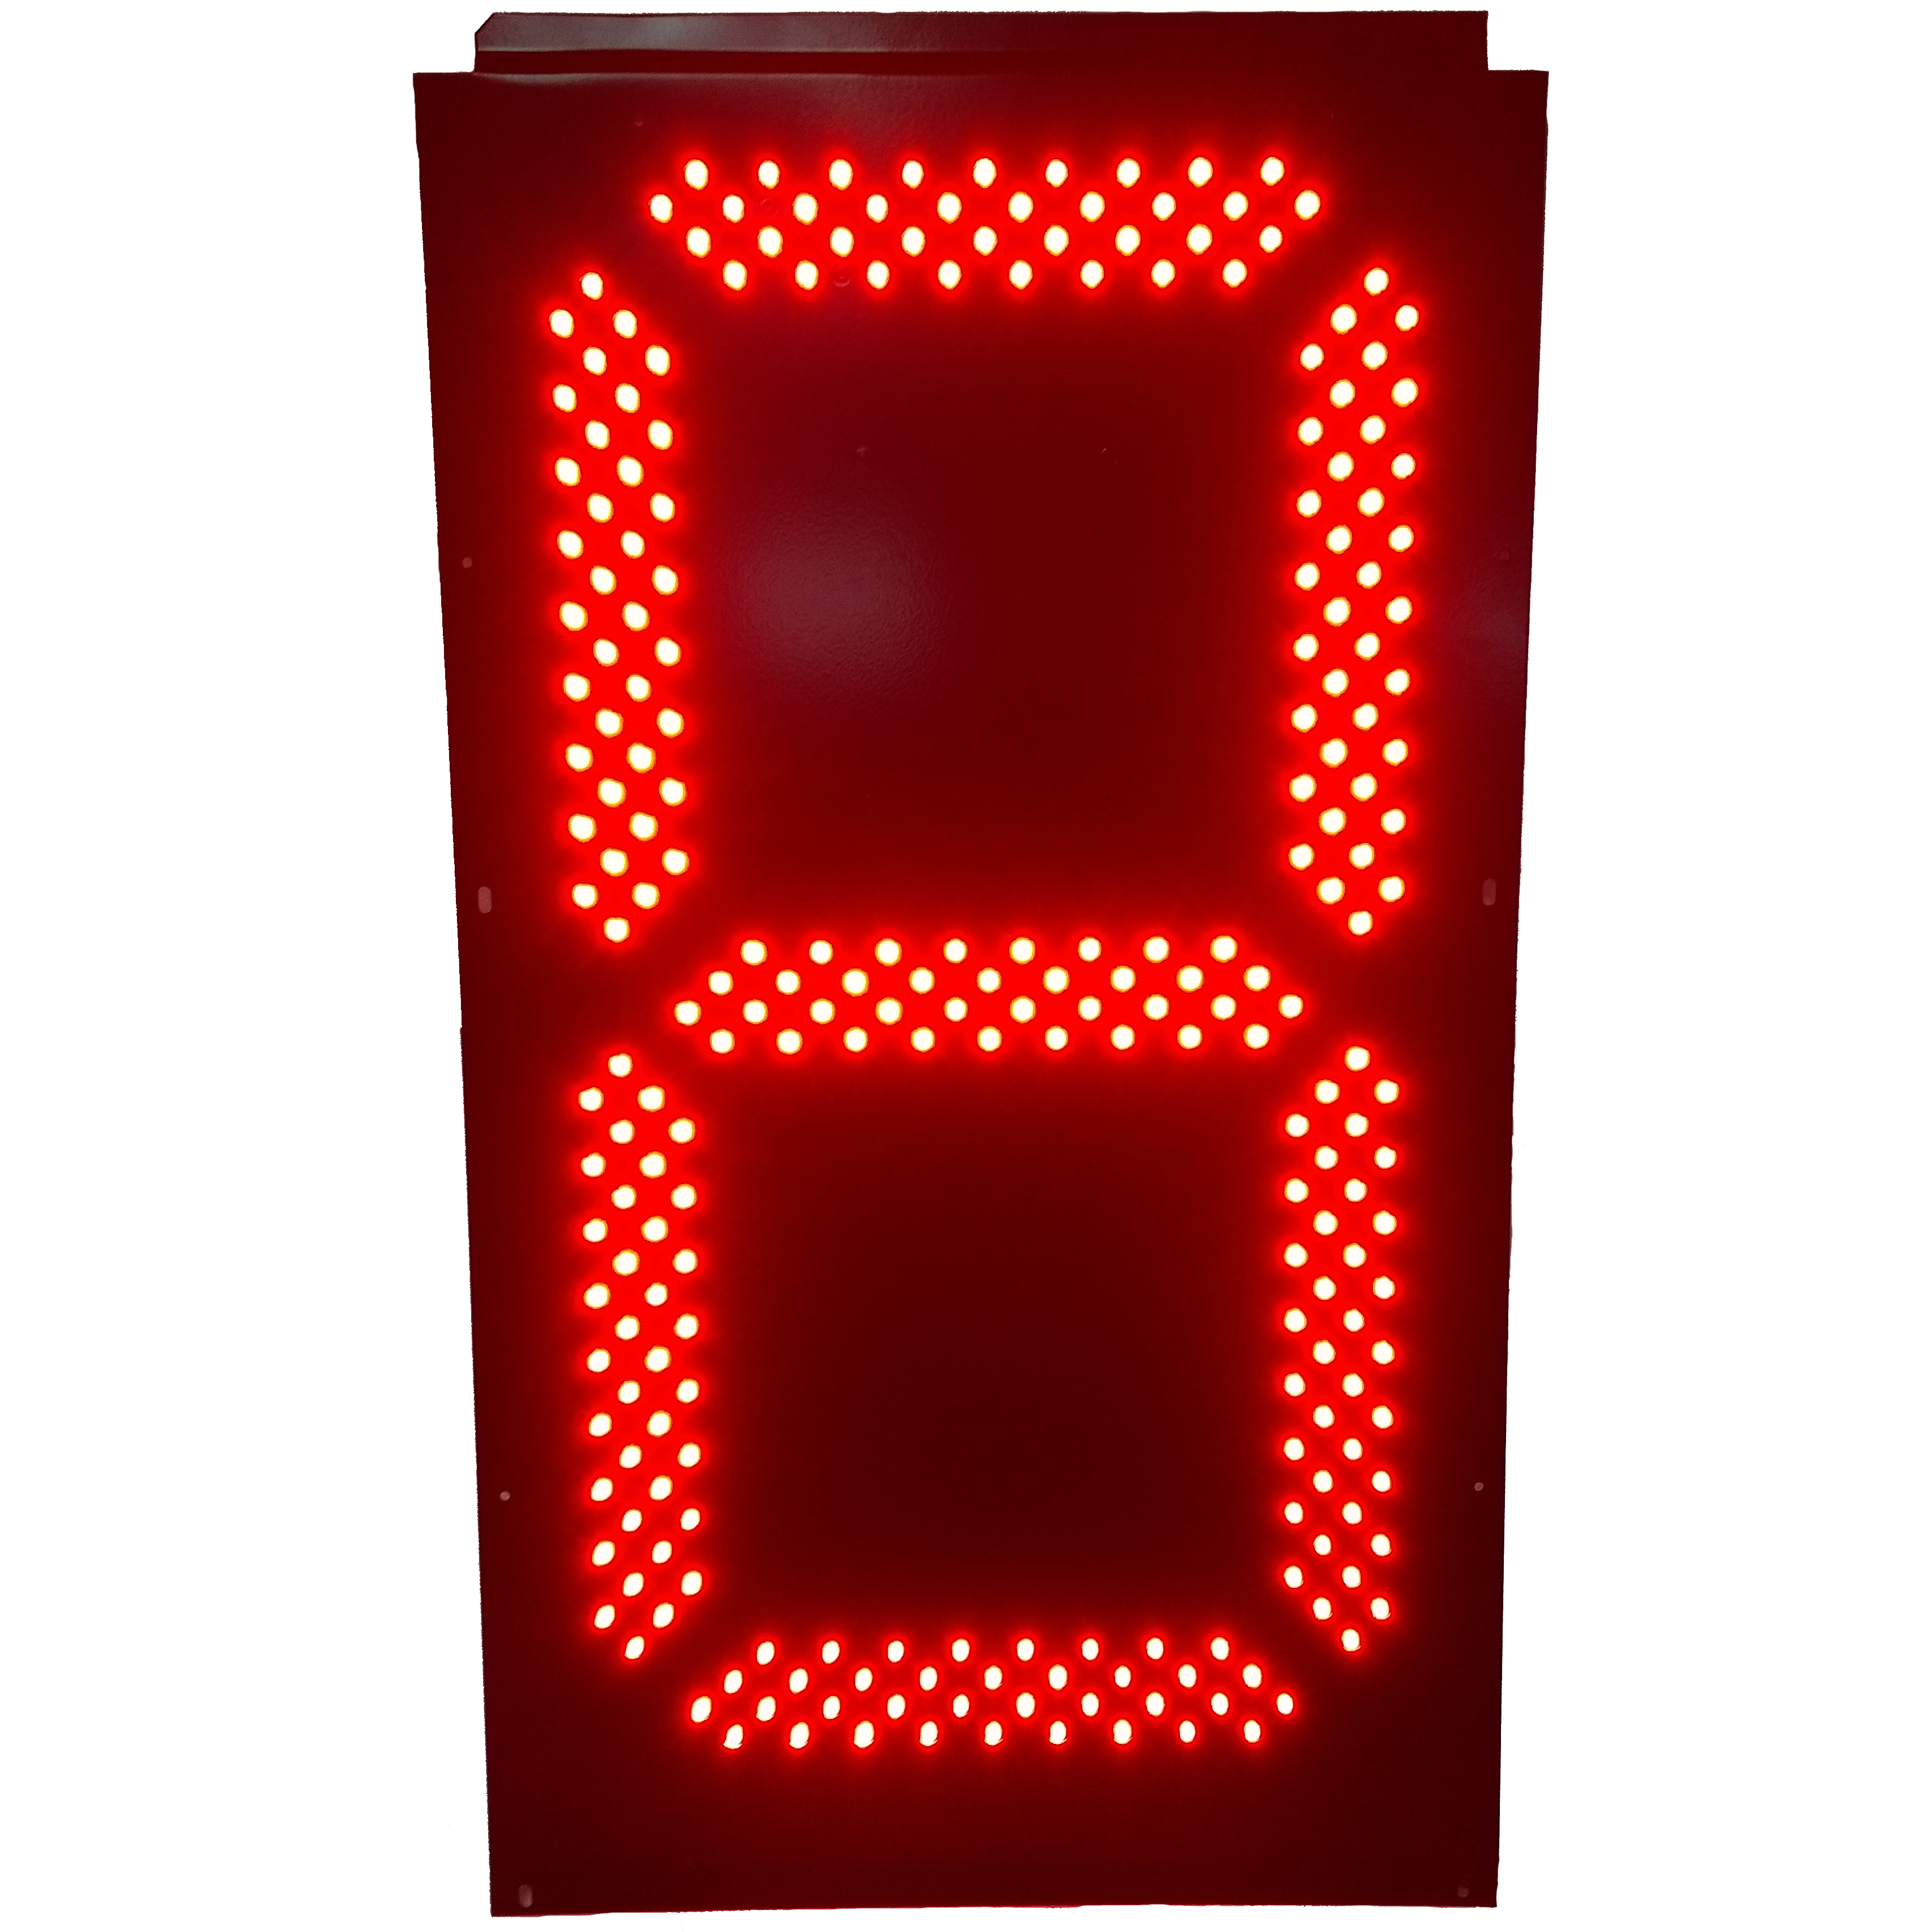 (0A-1192-2231) Daktronics 24" Outdoor Red LED Digit